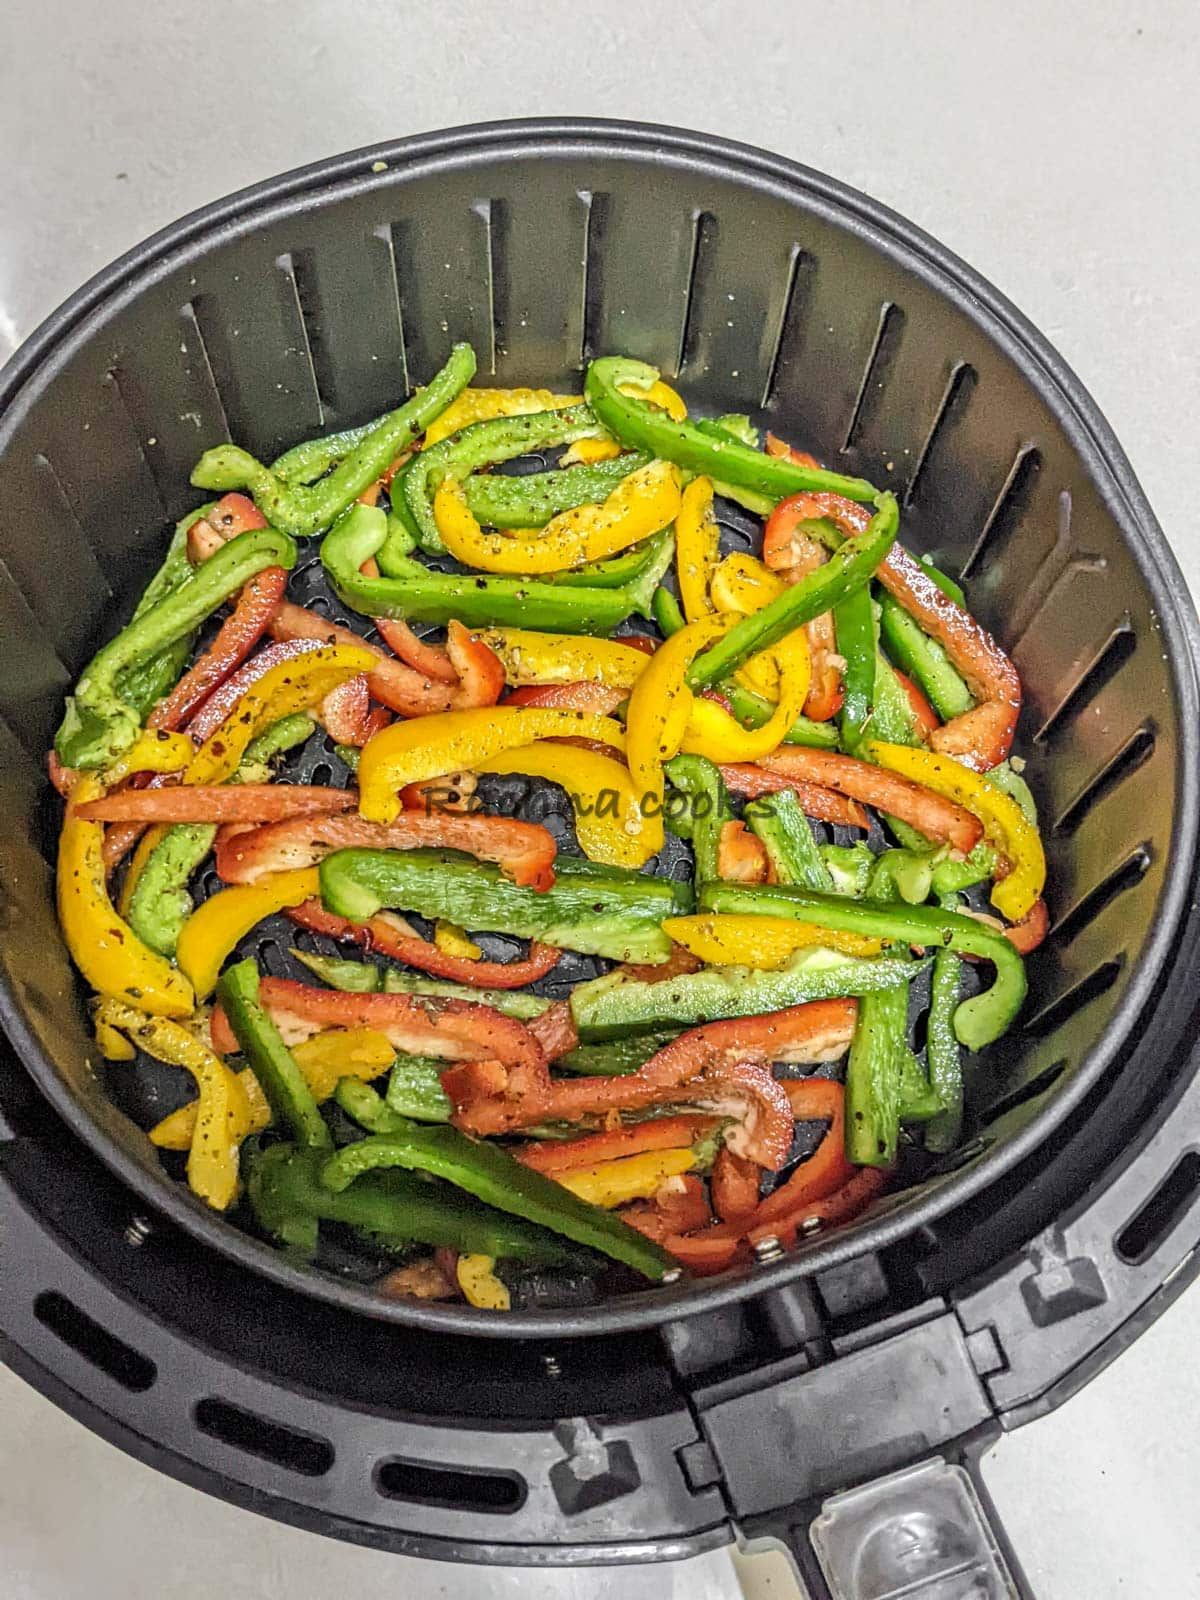 Marinated peppers in air fryer basket ready for air frying.